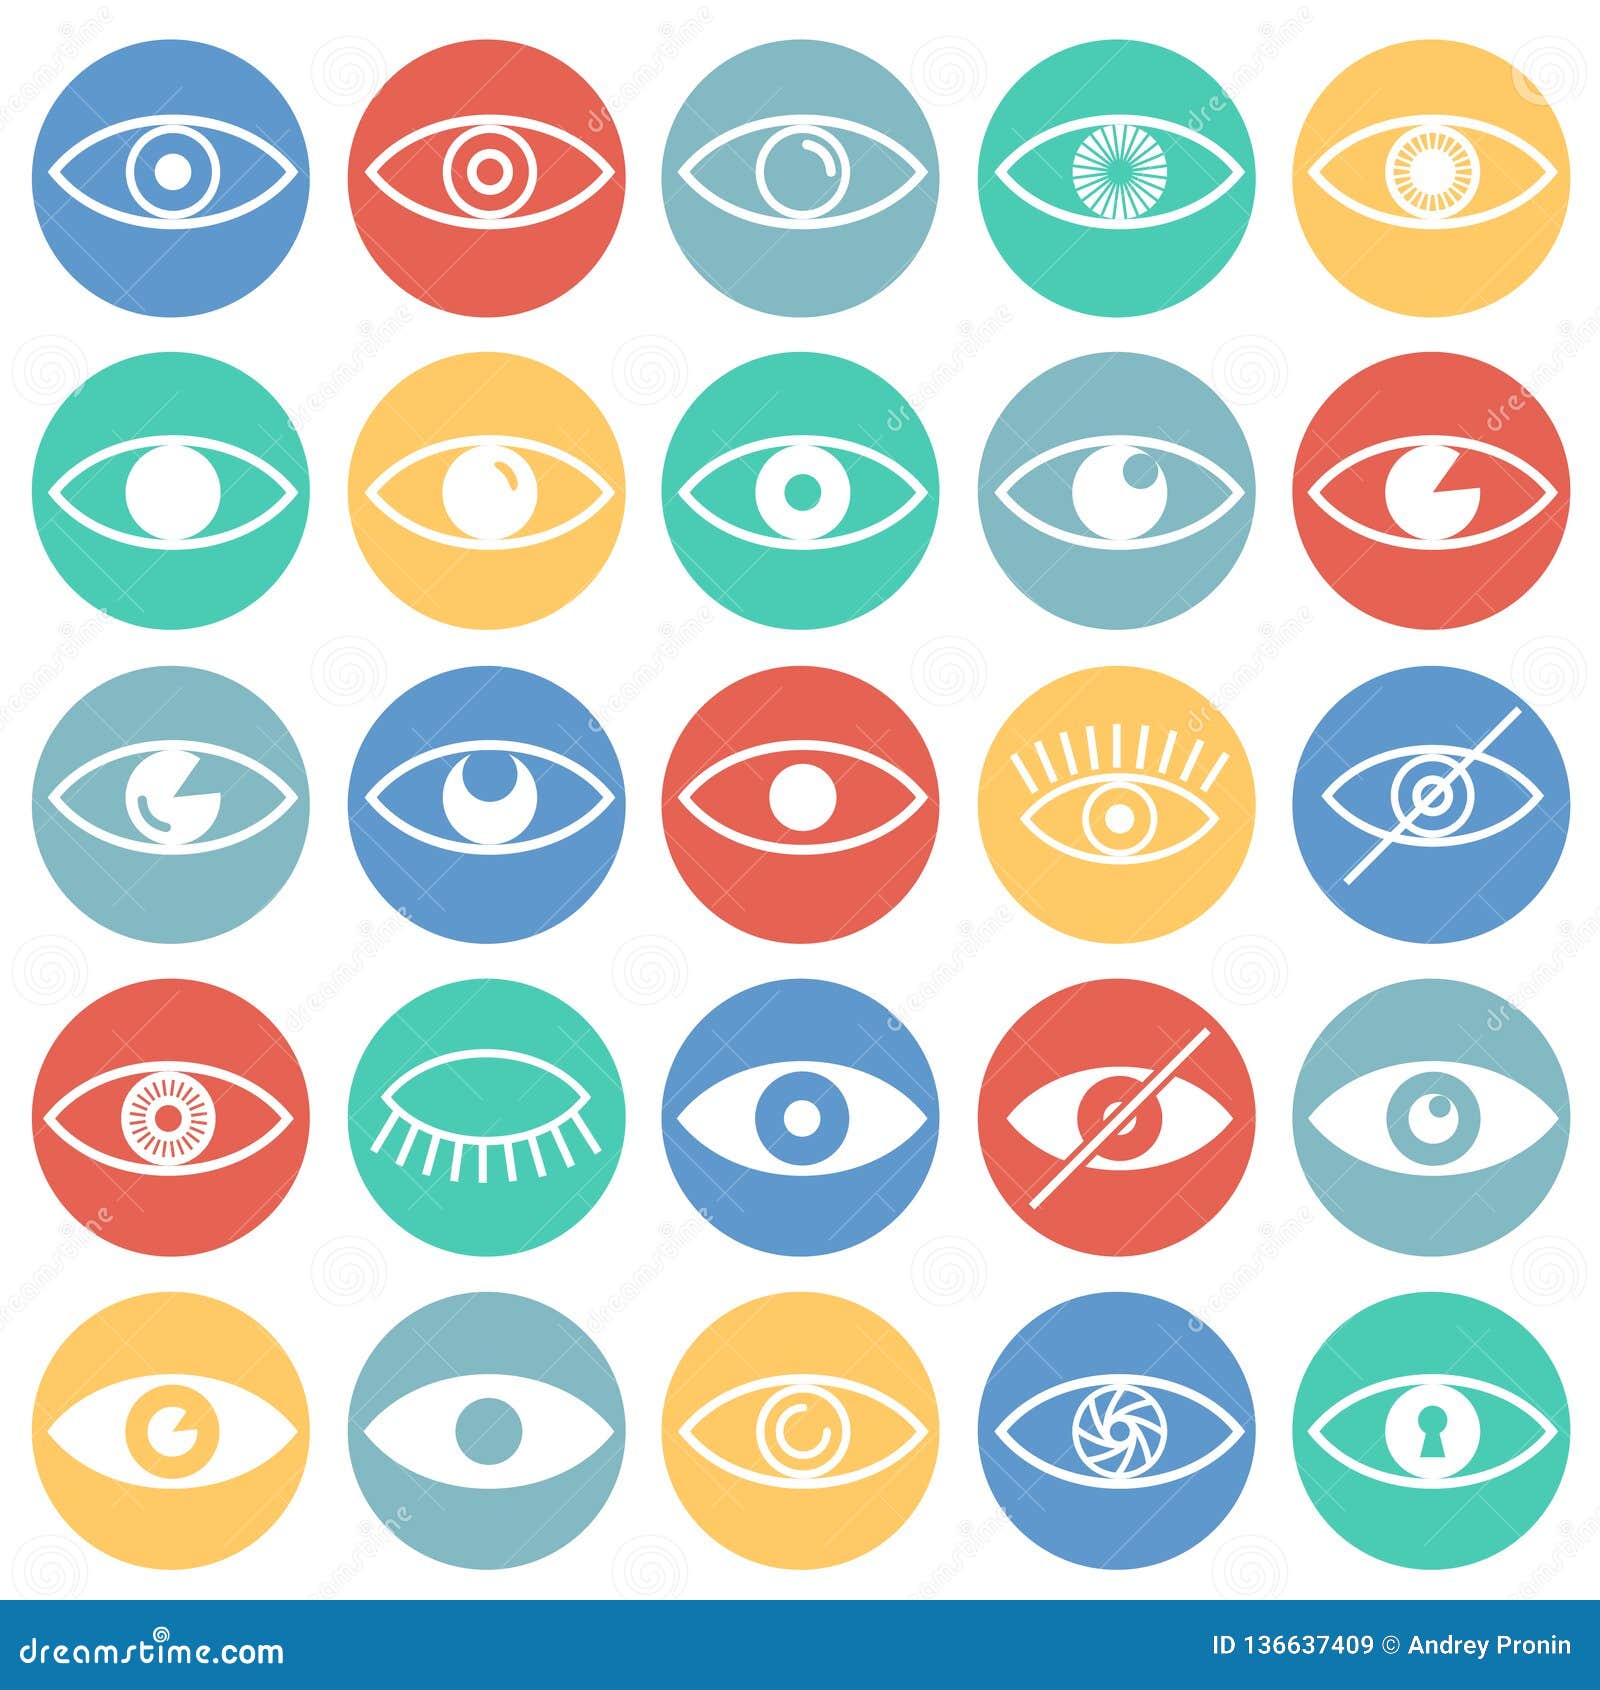 Eye Icons Set on Color Circles Background for Graphic and Web Design ...